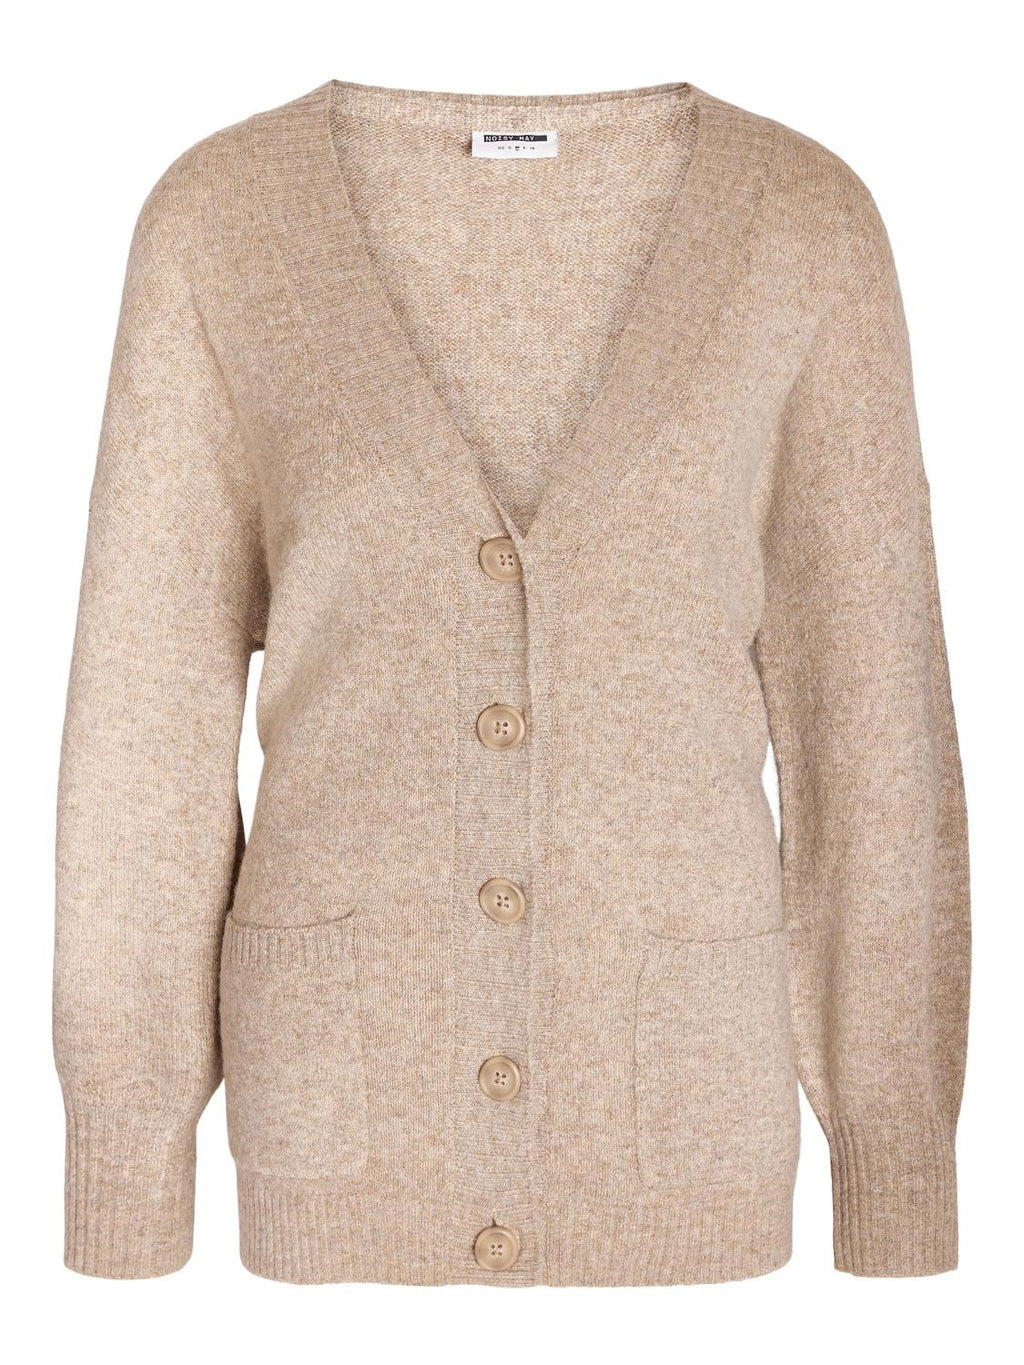 - Knitted cardigan  - Button fastenings through front  - V-neck  - Long sleeves with dropped shoulders  - Ribbed neckline, hem and cuffs  - Front patch pockets  - Relaxed fit